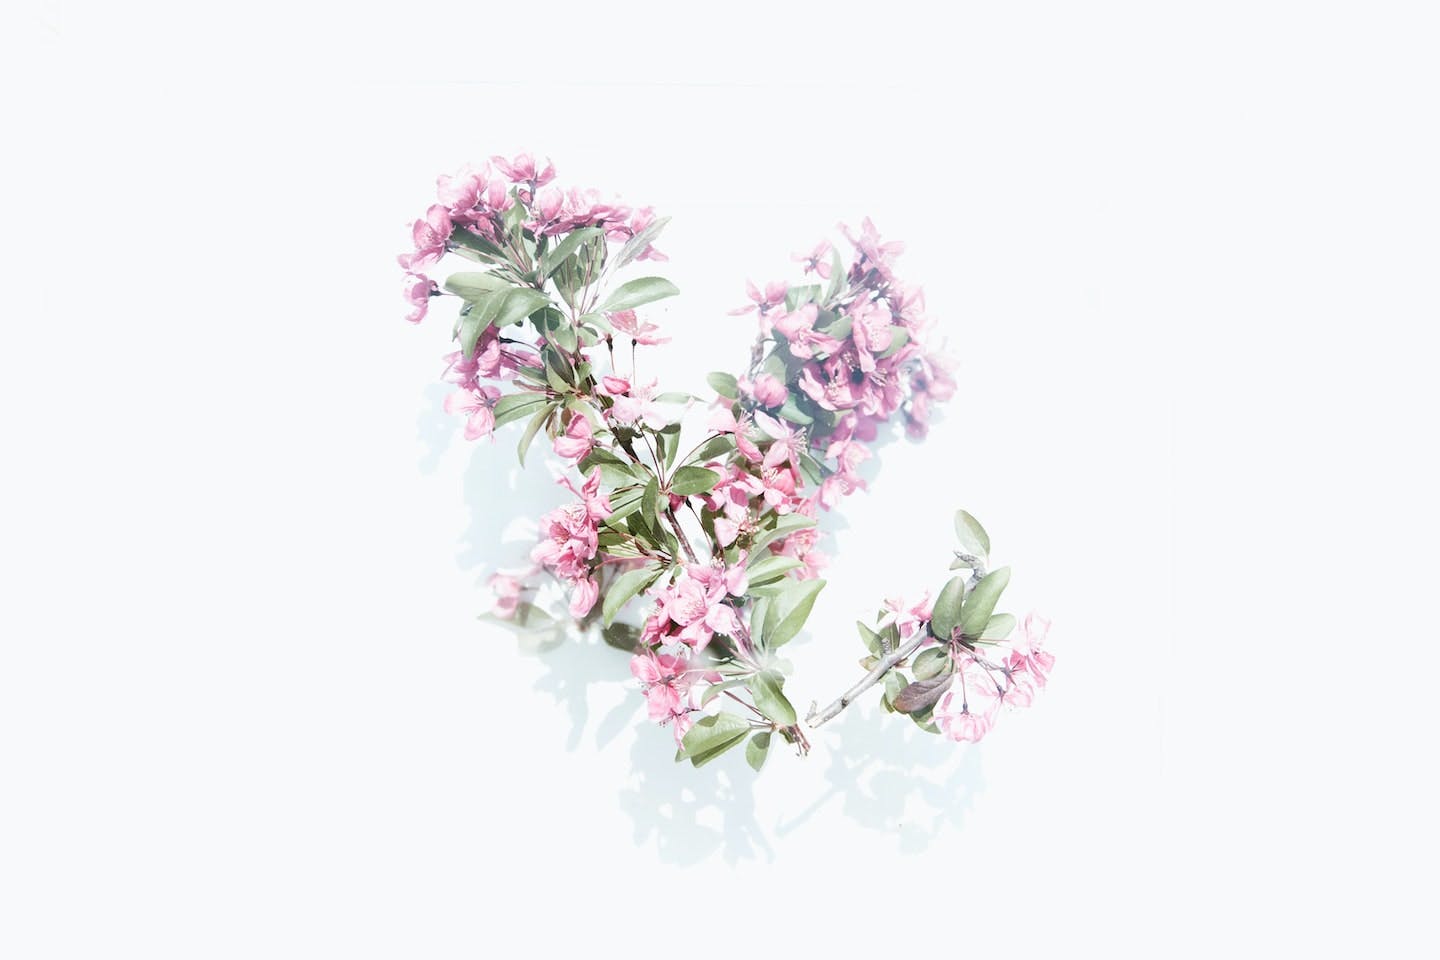 floral background image to decorate the header